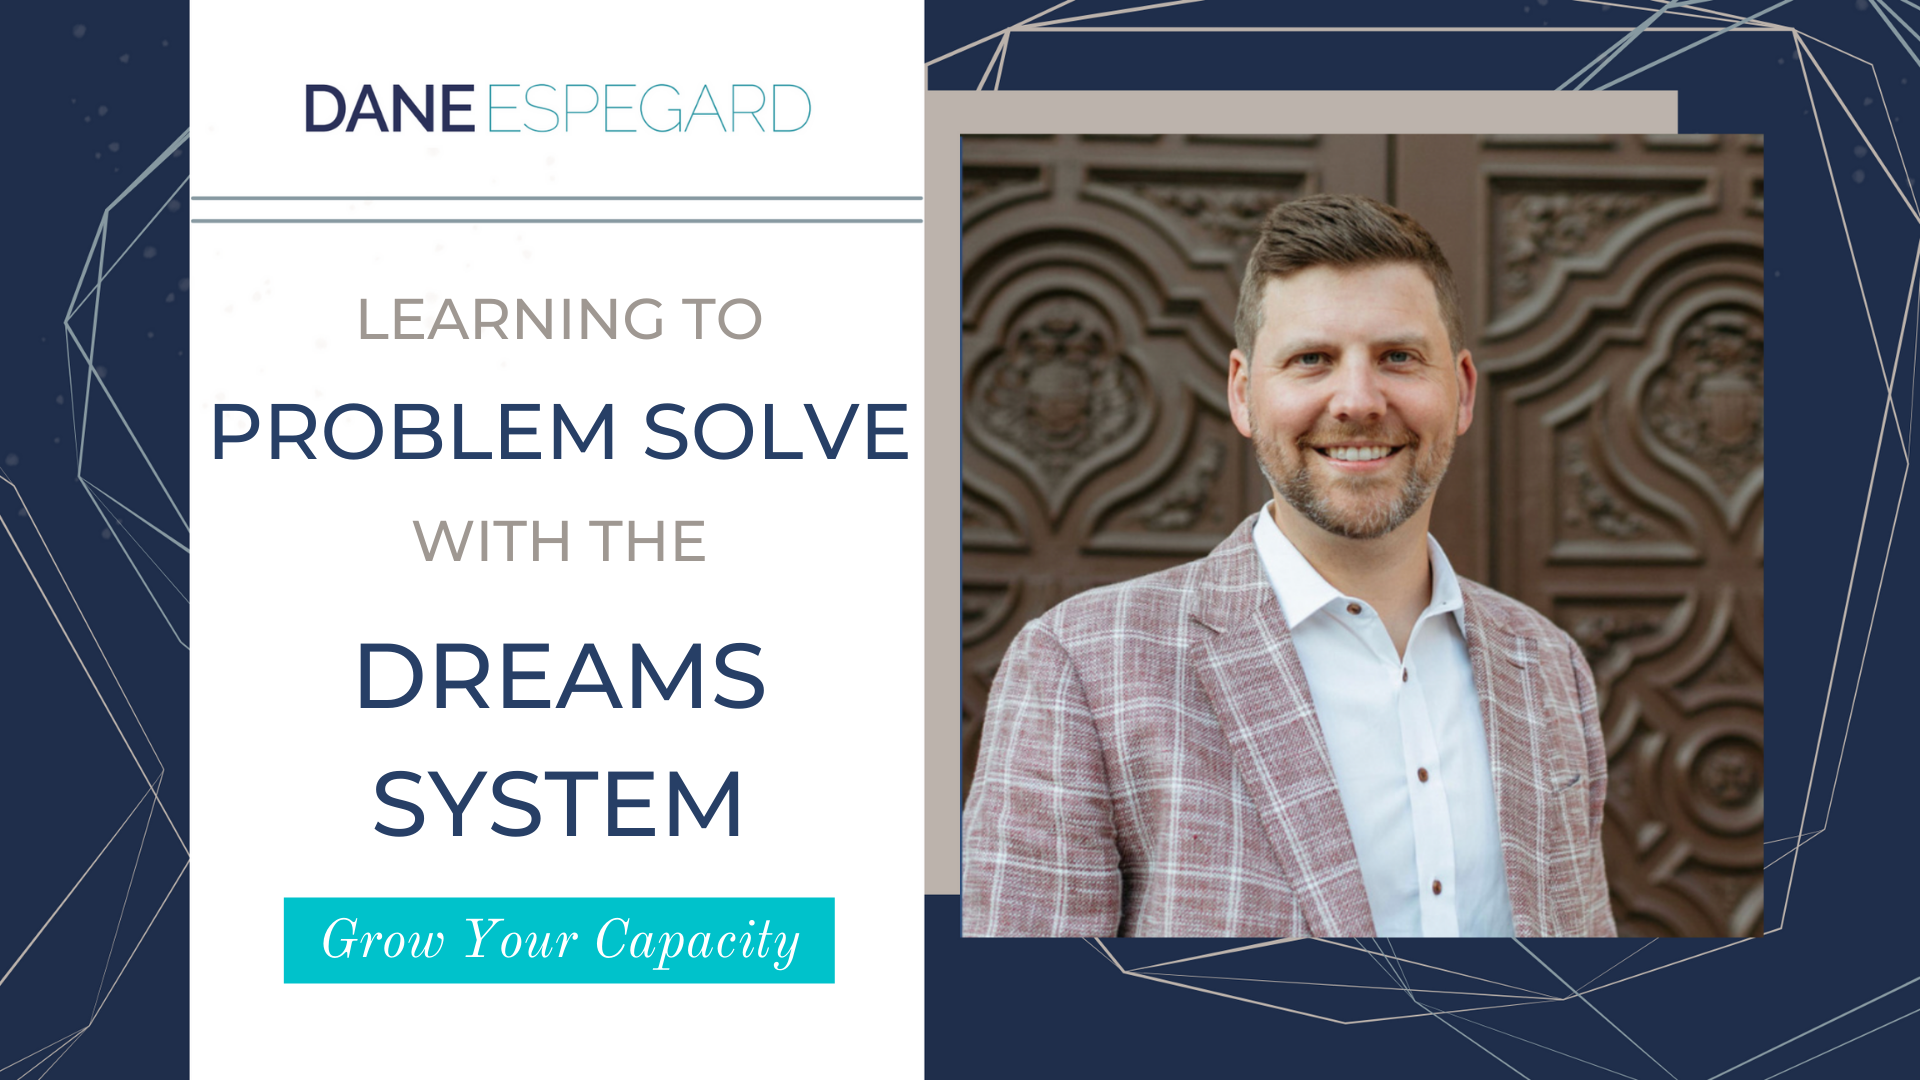 How to become a better problem solver with the Dreams System